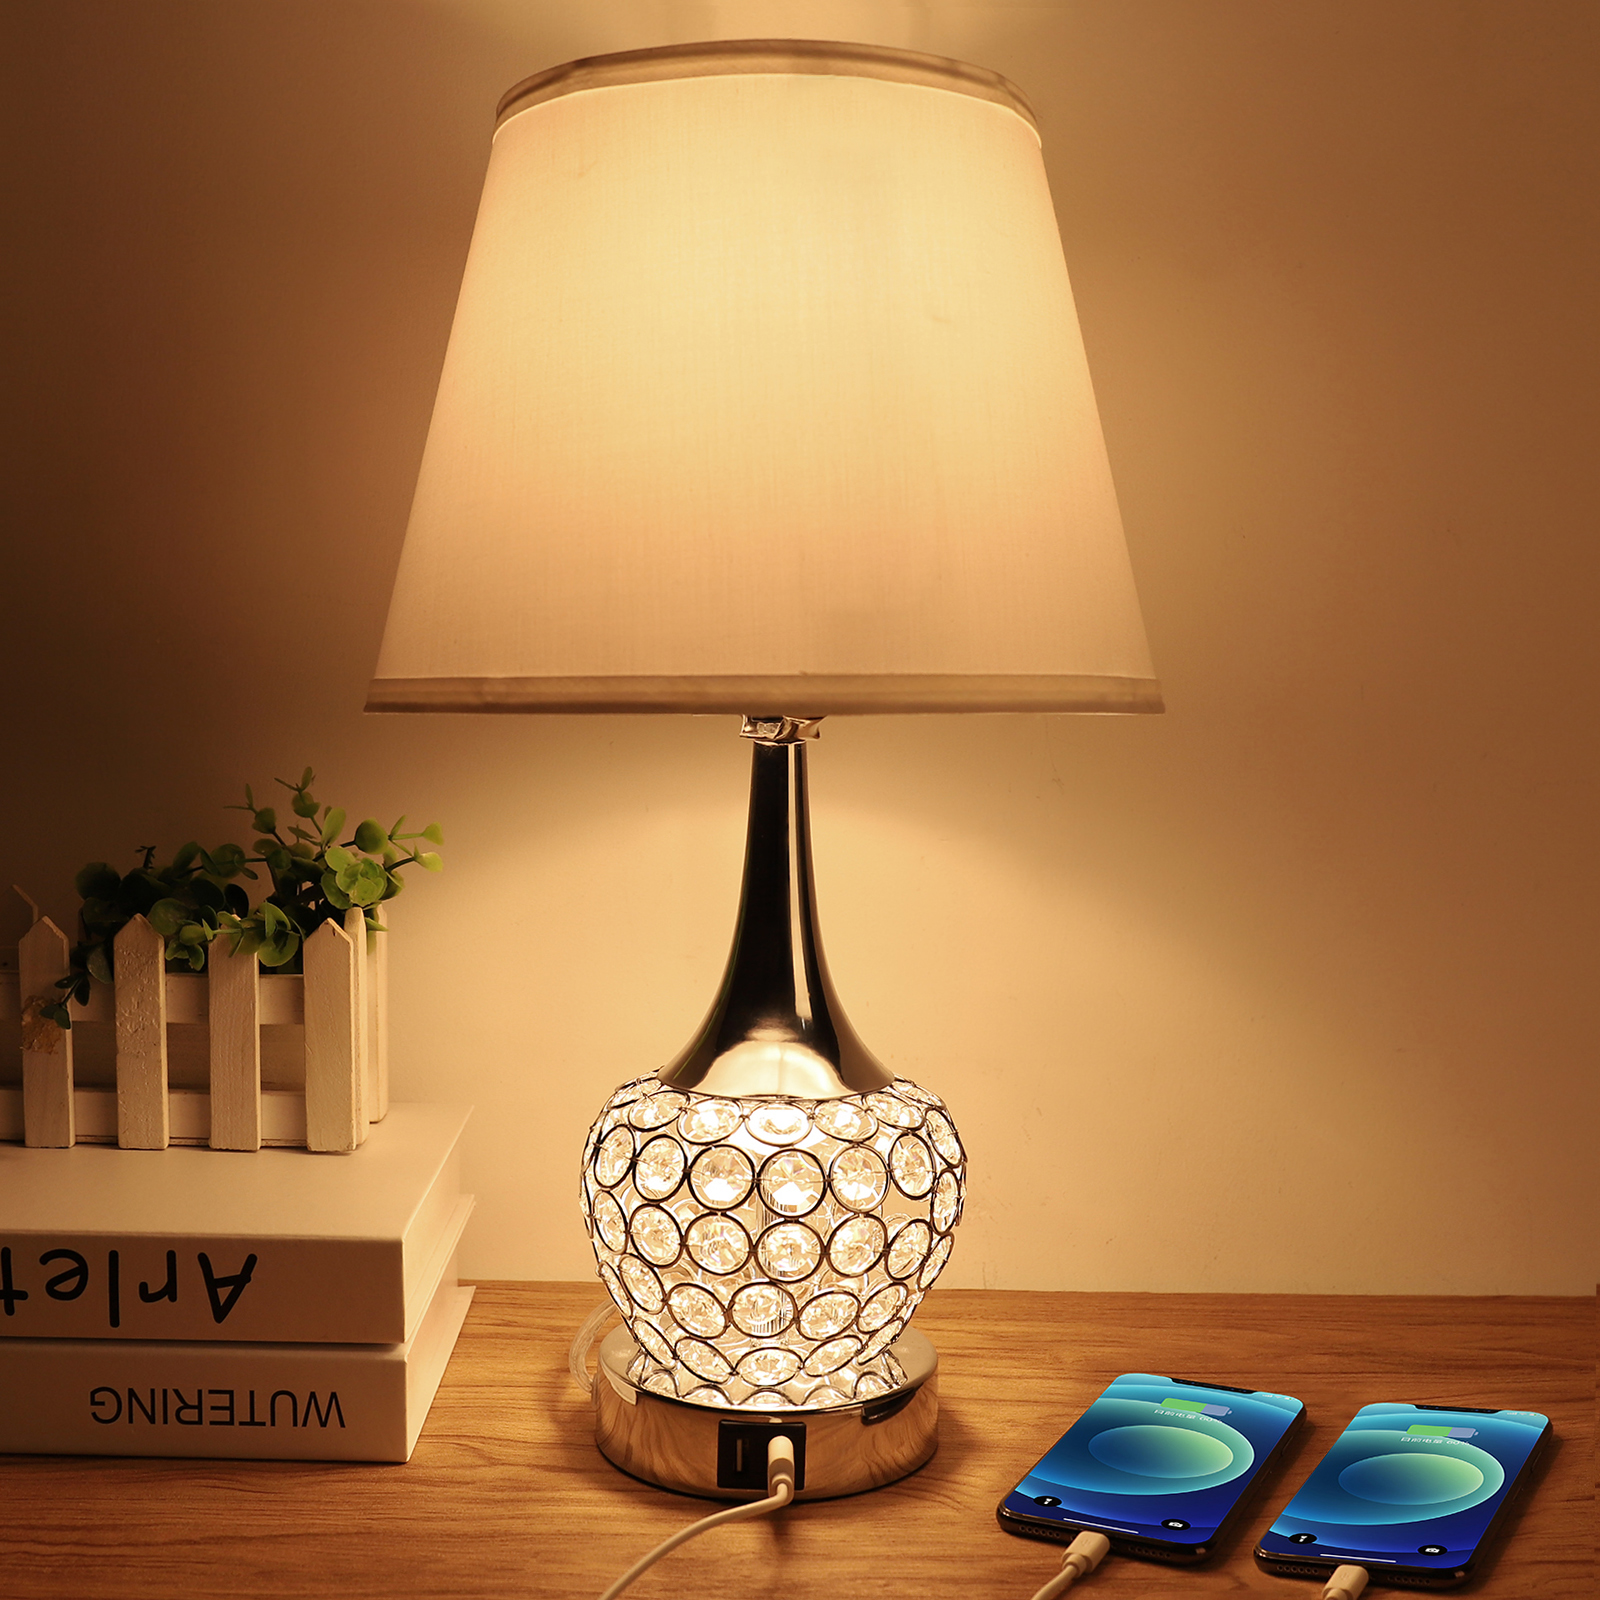 Crystal Table Lamp, Bedside Nightstand Lamp with Dual USB Ports, Modern Table Lamp 4 Way Switch Decorative for Bedroom, Living Room, Dressing Room, A19 6W LED Bulb Included